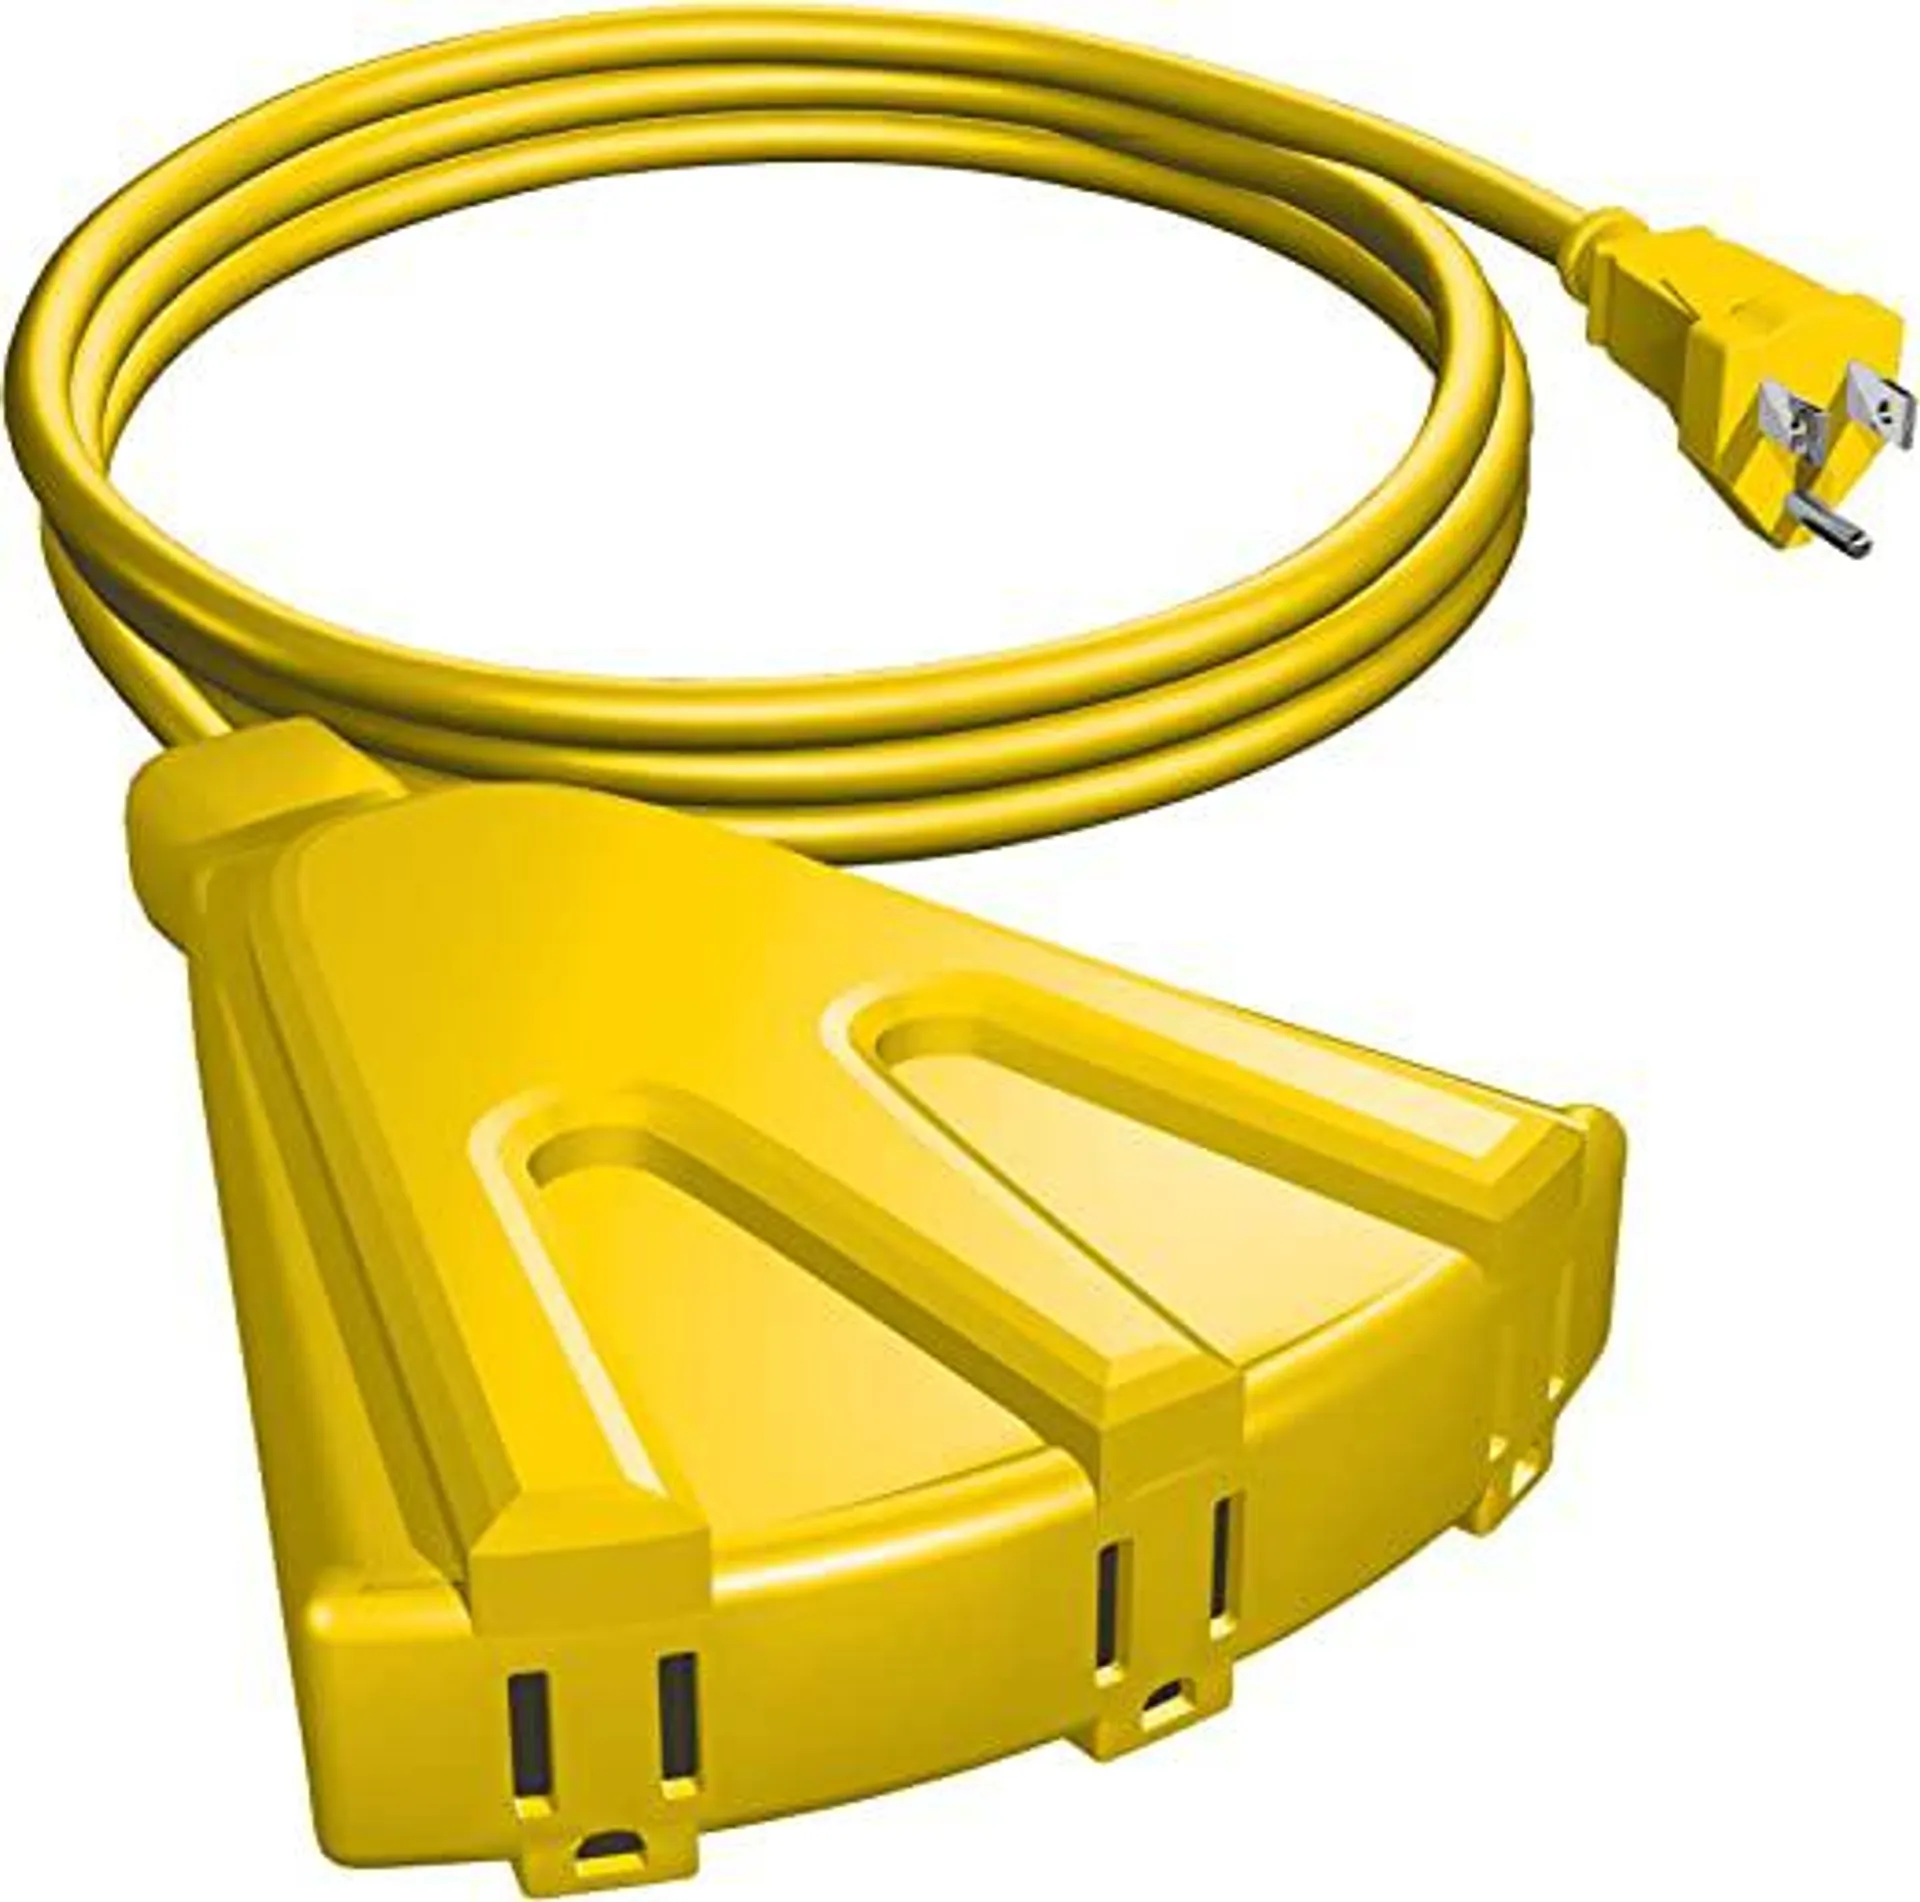 Stanley 34087 Grounded 3-Outlet Outdoor Extension Power Cord 3, 8-Feet, Yellow